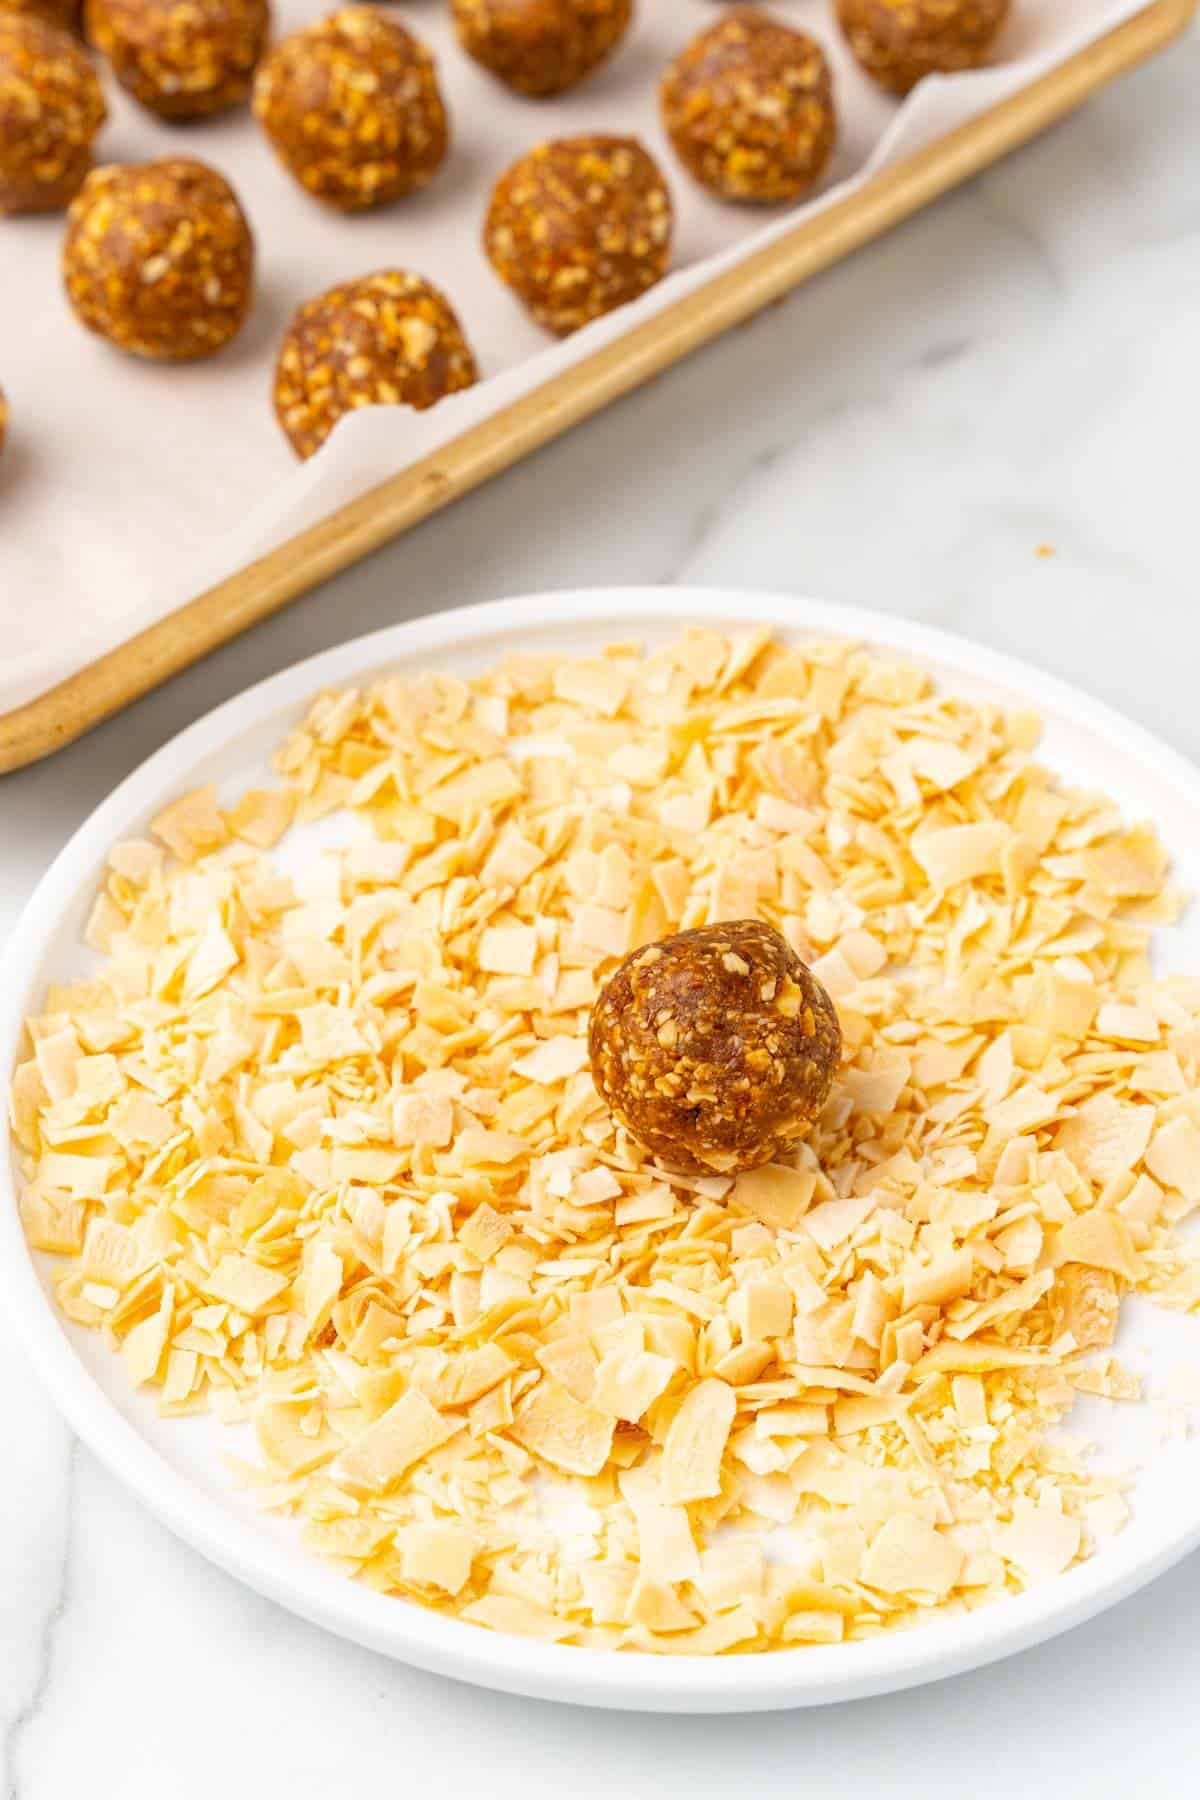 One date ball placed on a white plate with chopped toasted coconut; more date balls in the background on a baking sheet lined with parchment paper